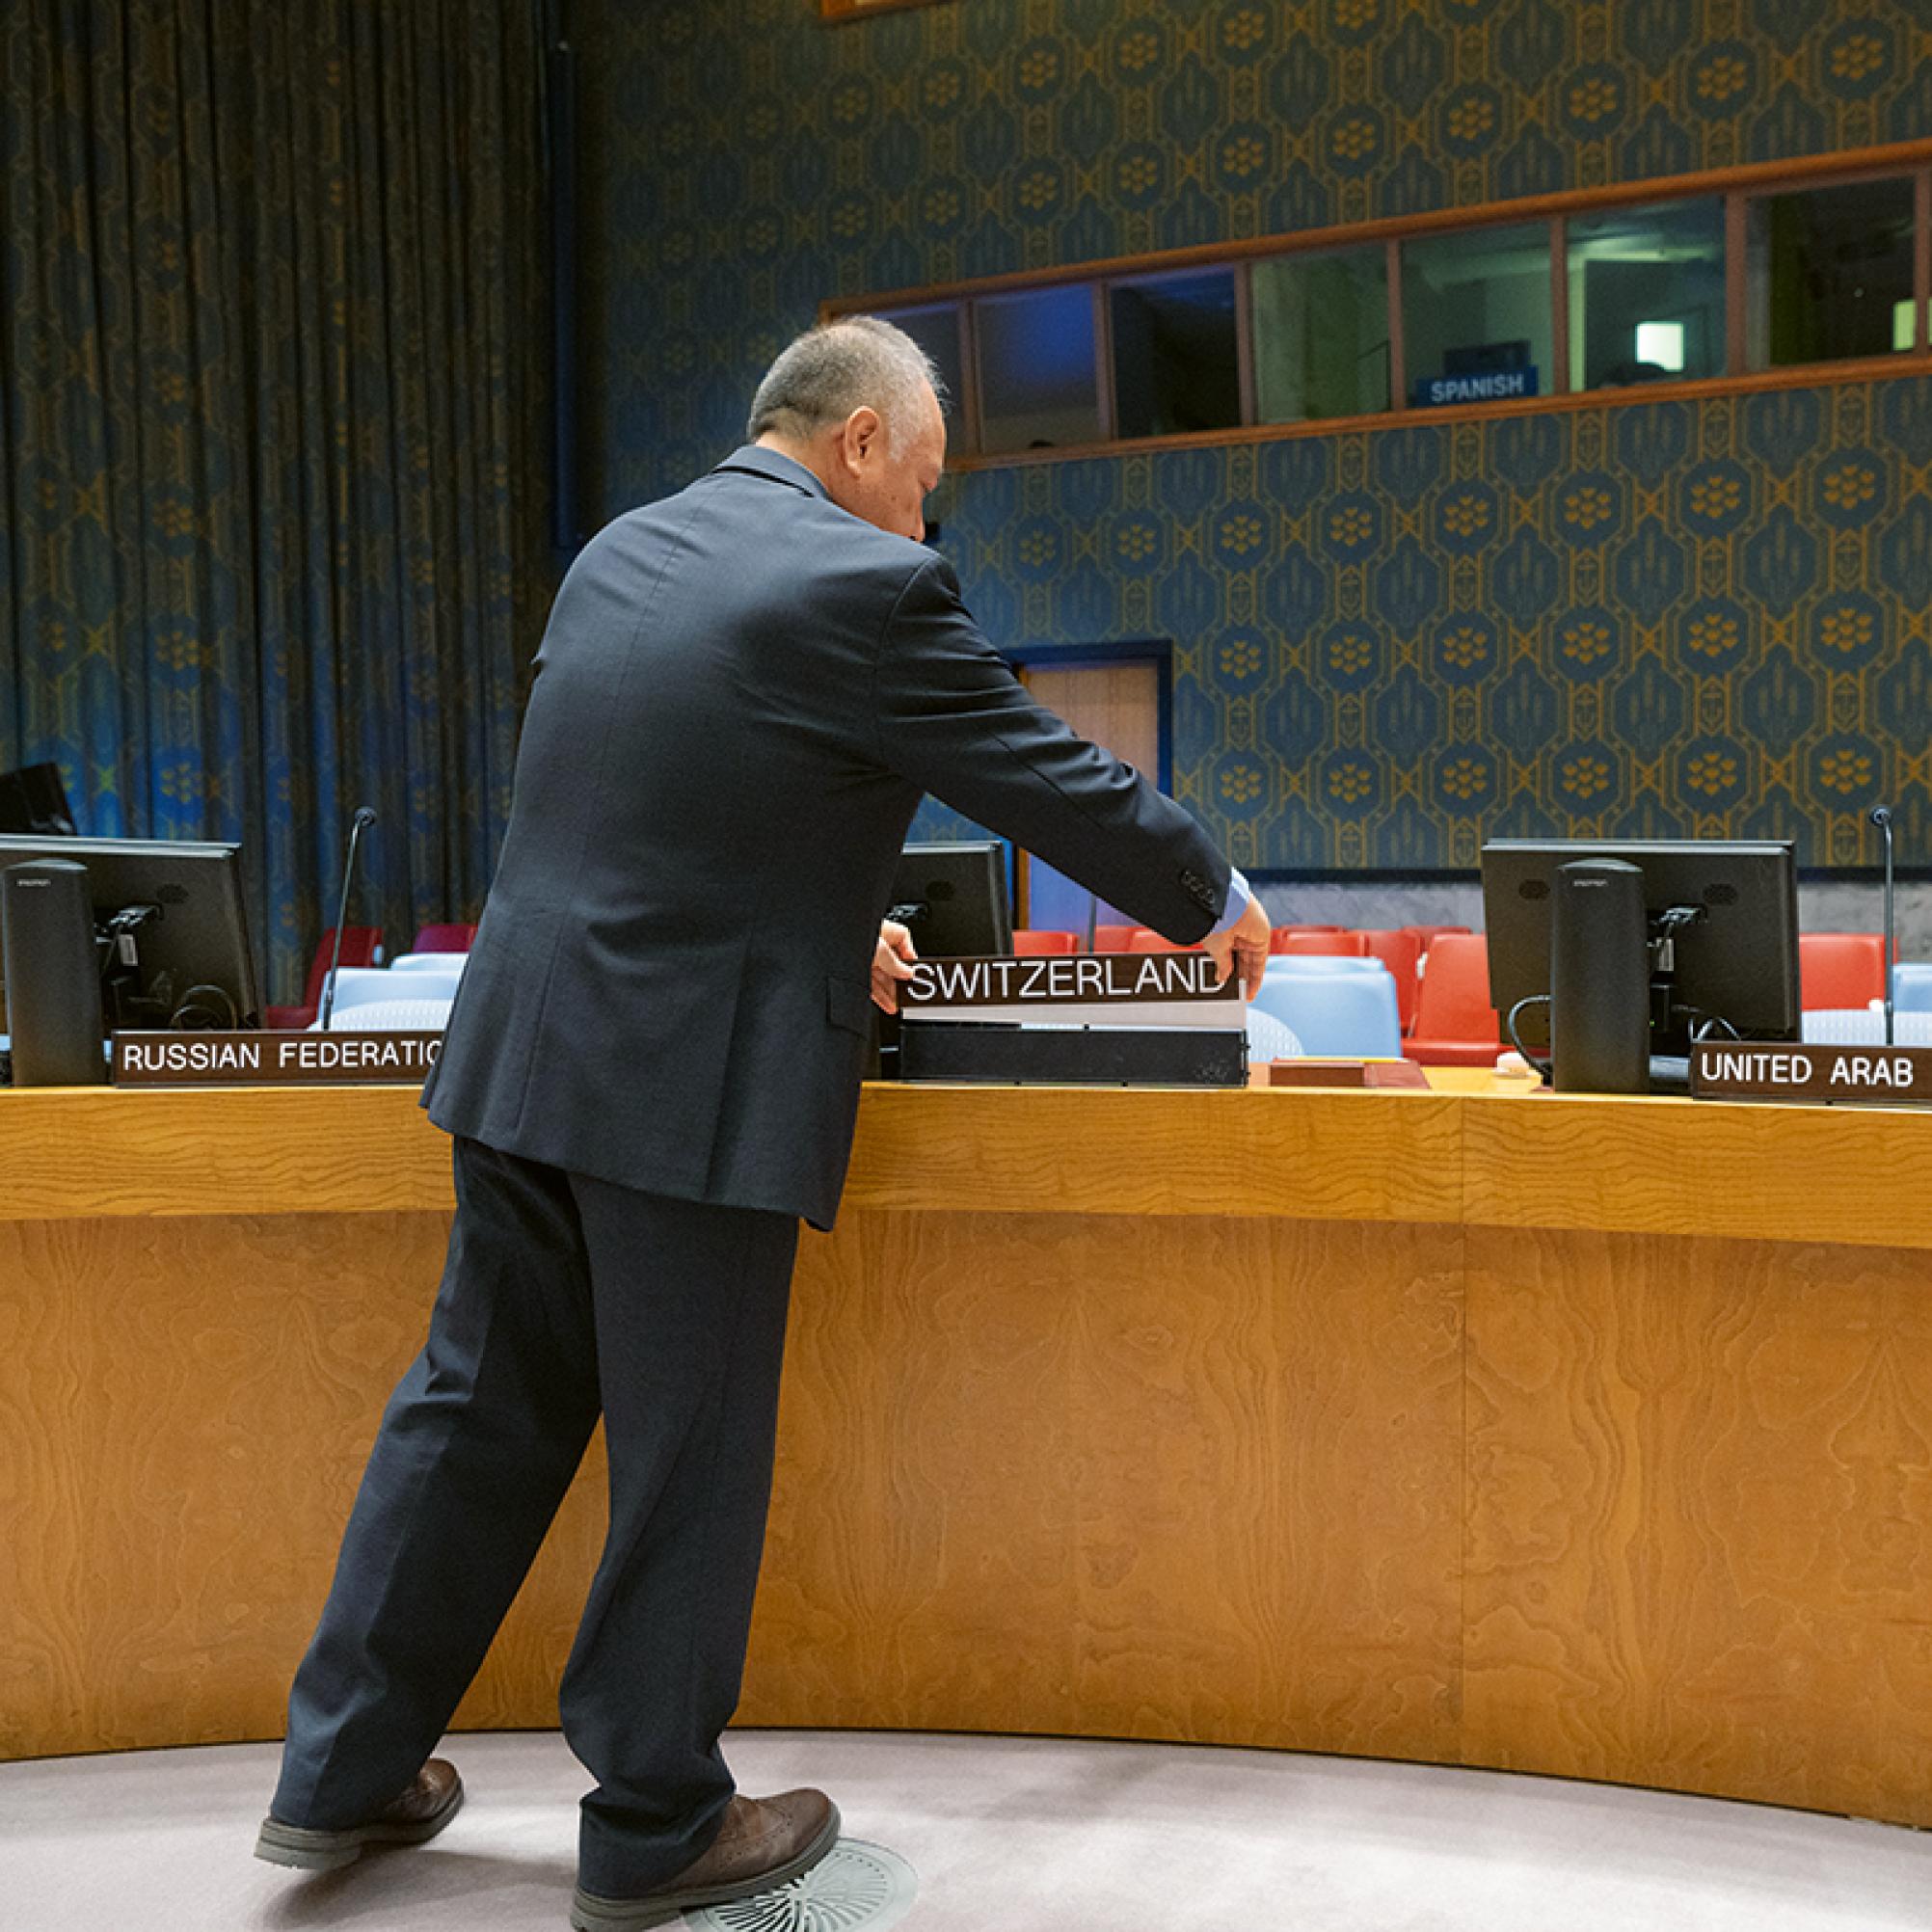 The photo shows a man preparing Switzerland's seat in the UN Security Council.